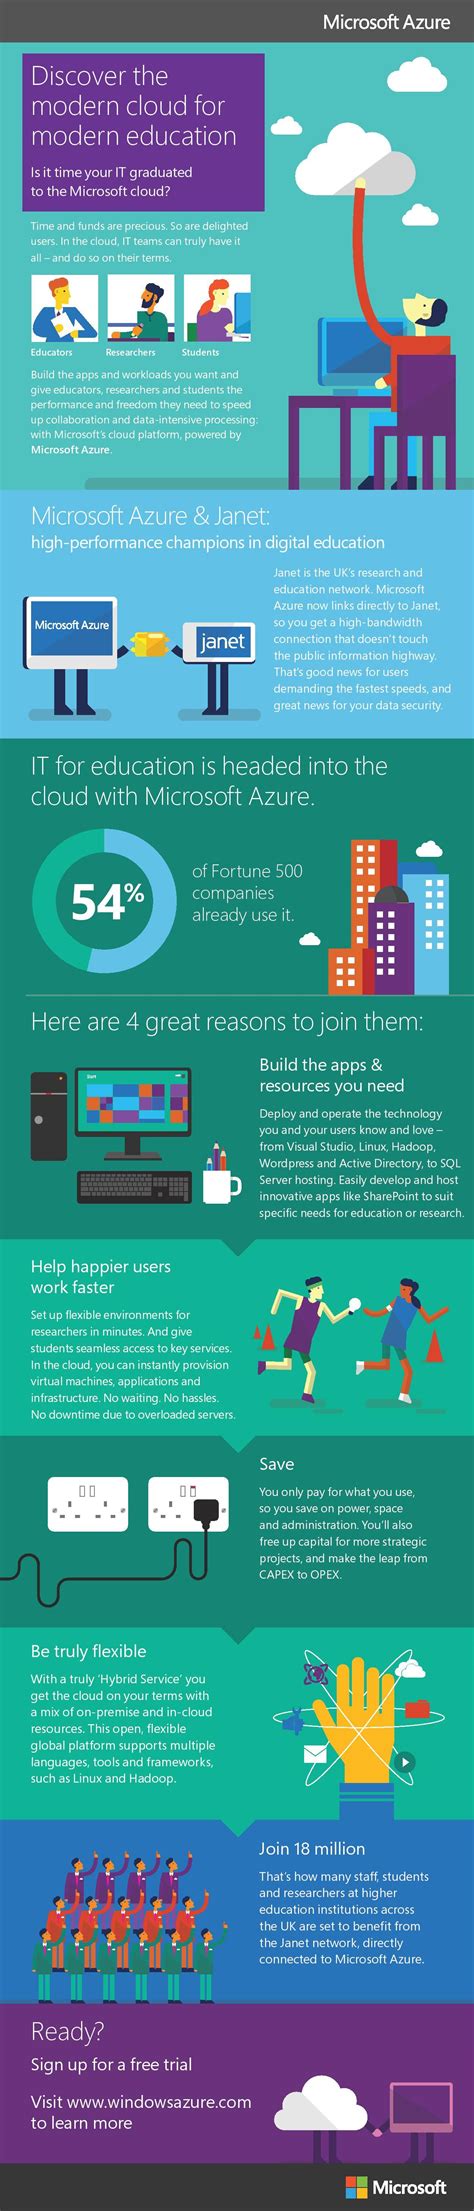 Microsoft Azure in Education Infographic - e-Learning Infographics